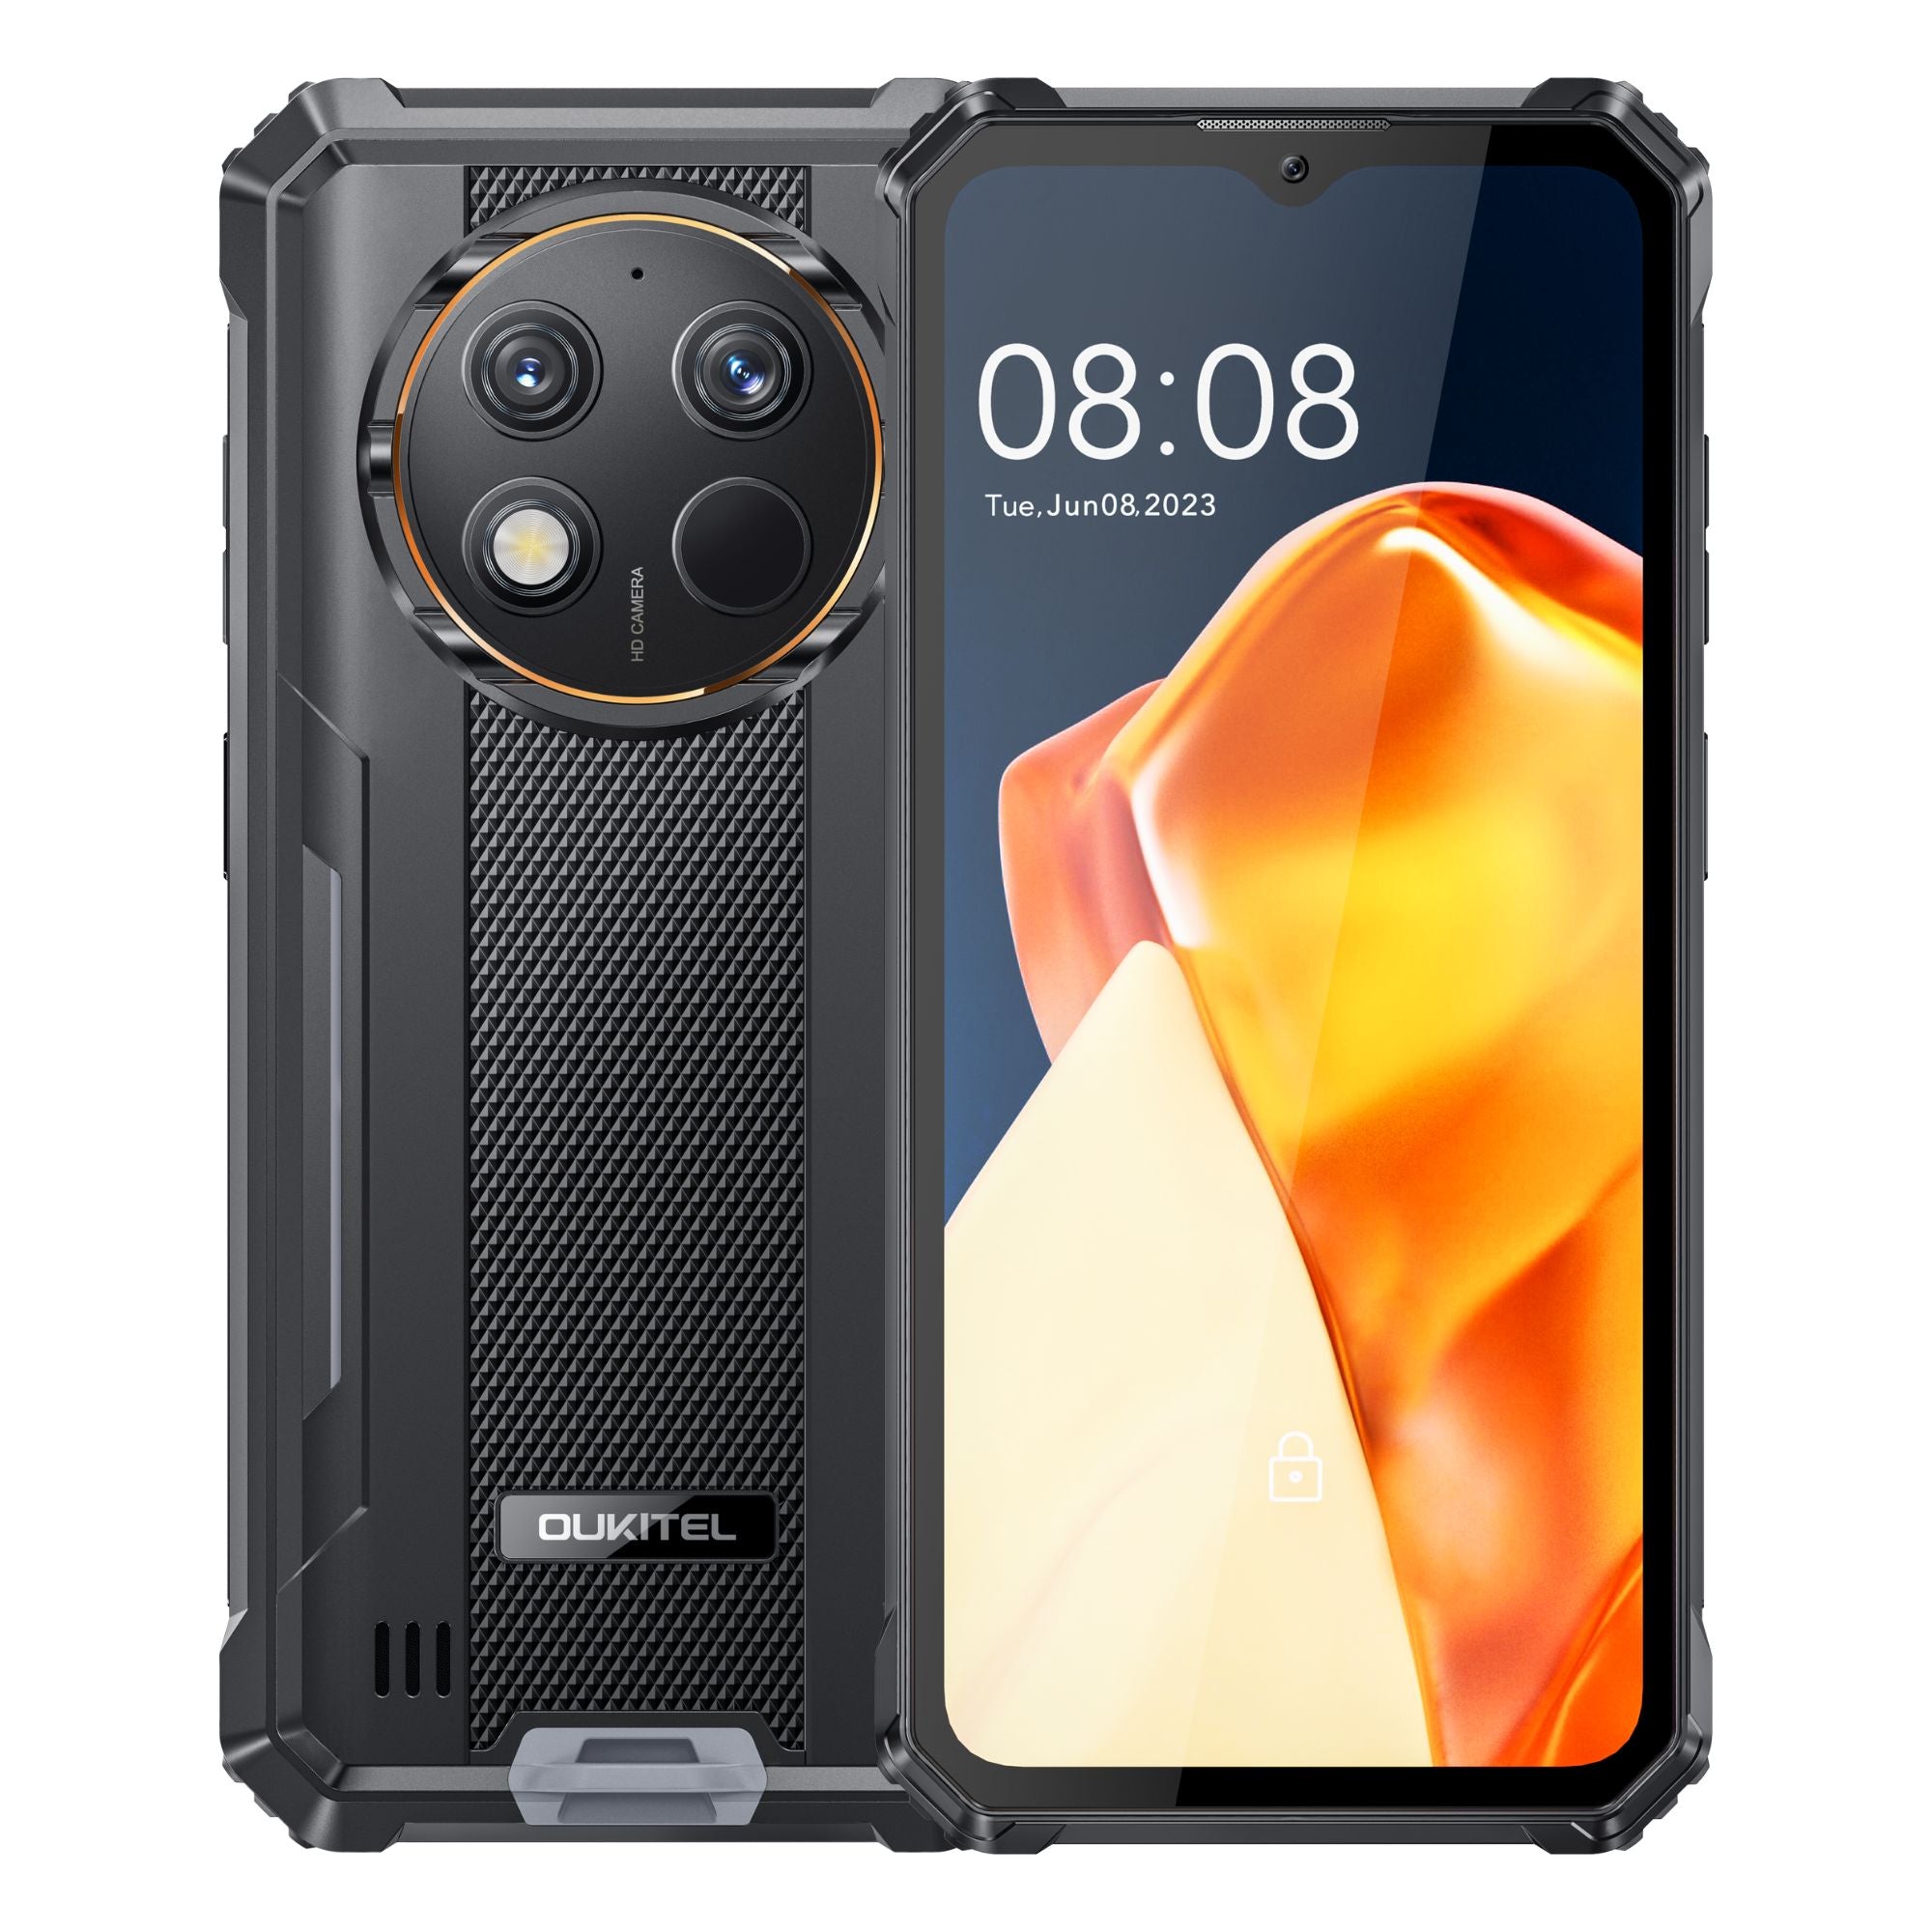 Oukitel WP19 Pro arrives with a 22000 mAh battery and a Helio G99 chipset